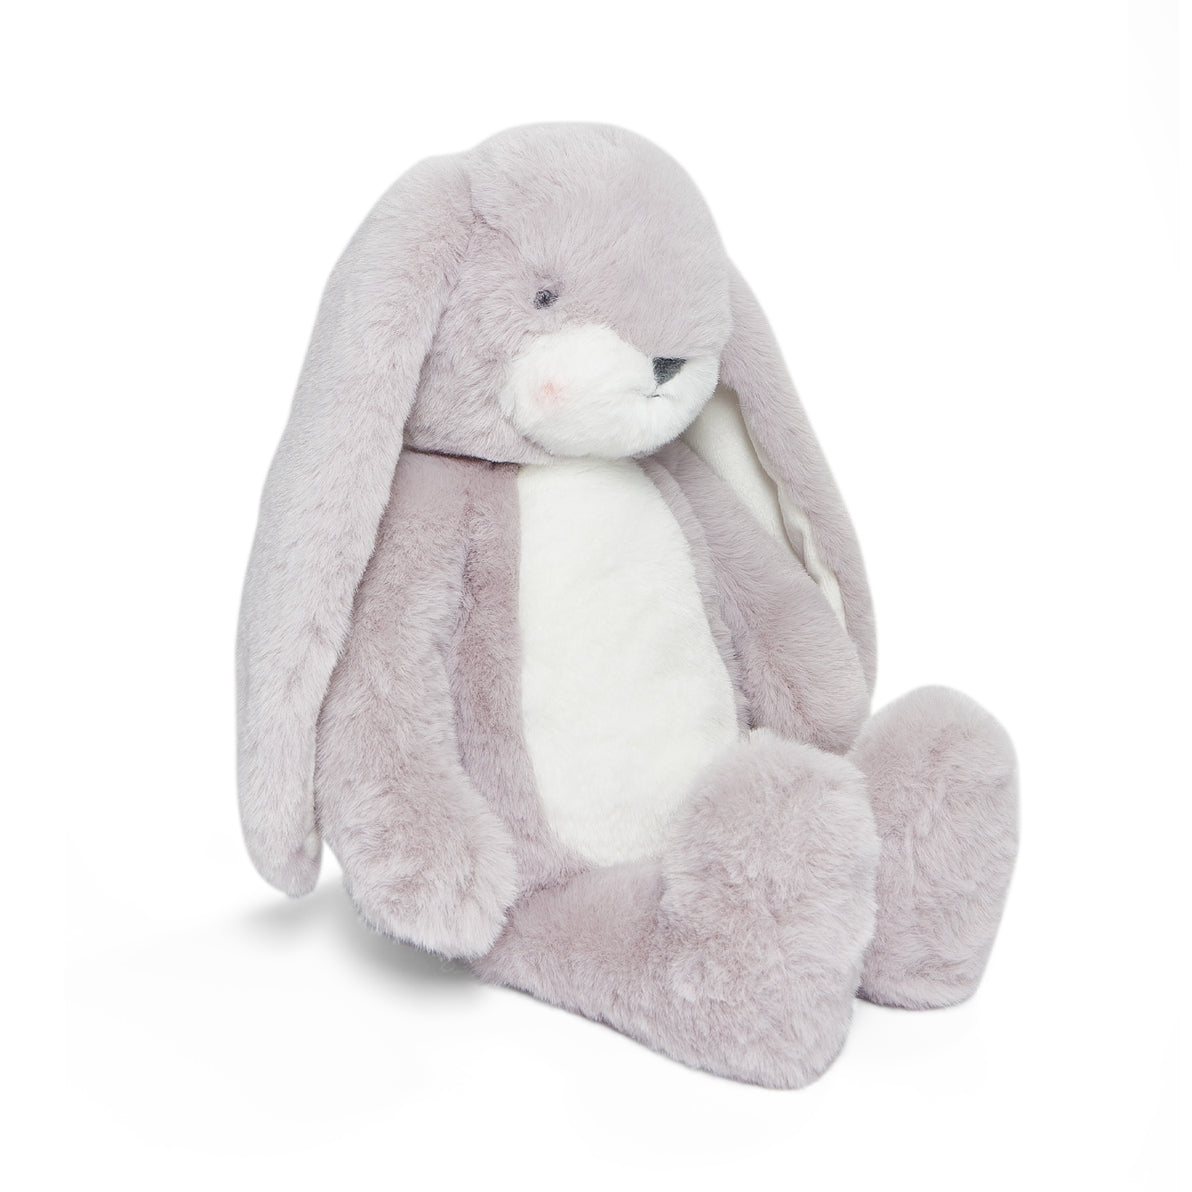 Little Nibble Bunny - Lilac Marble